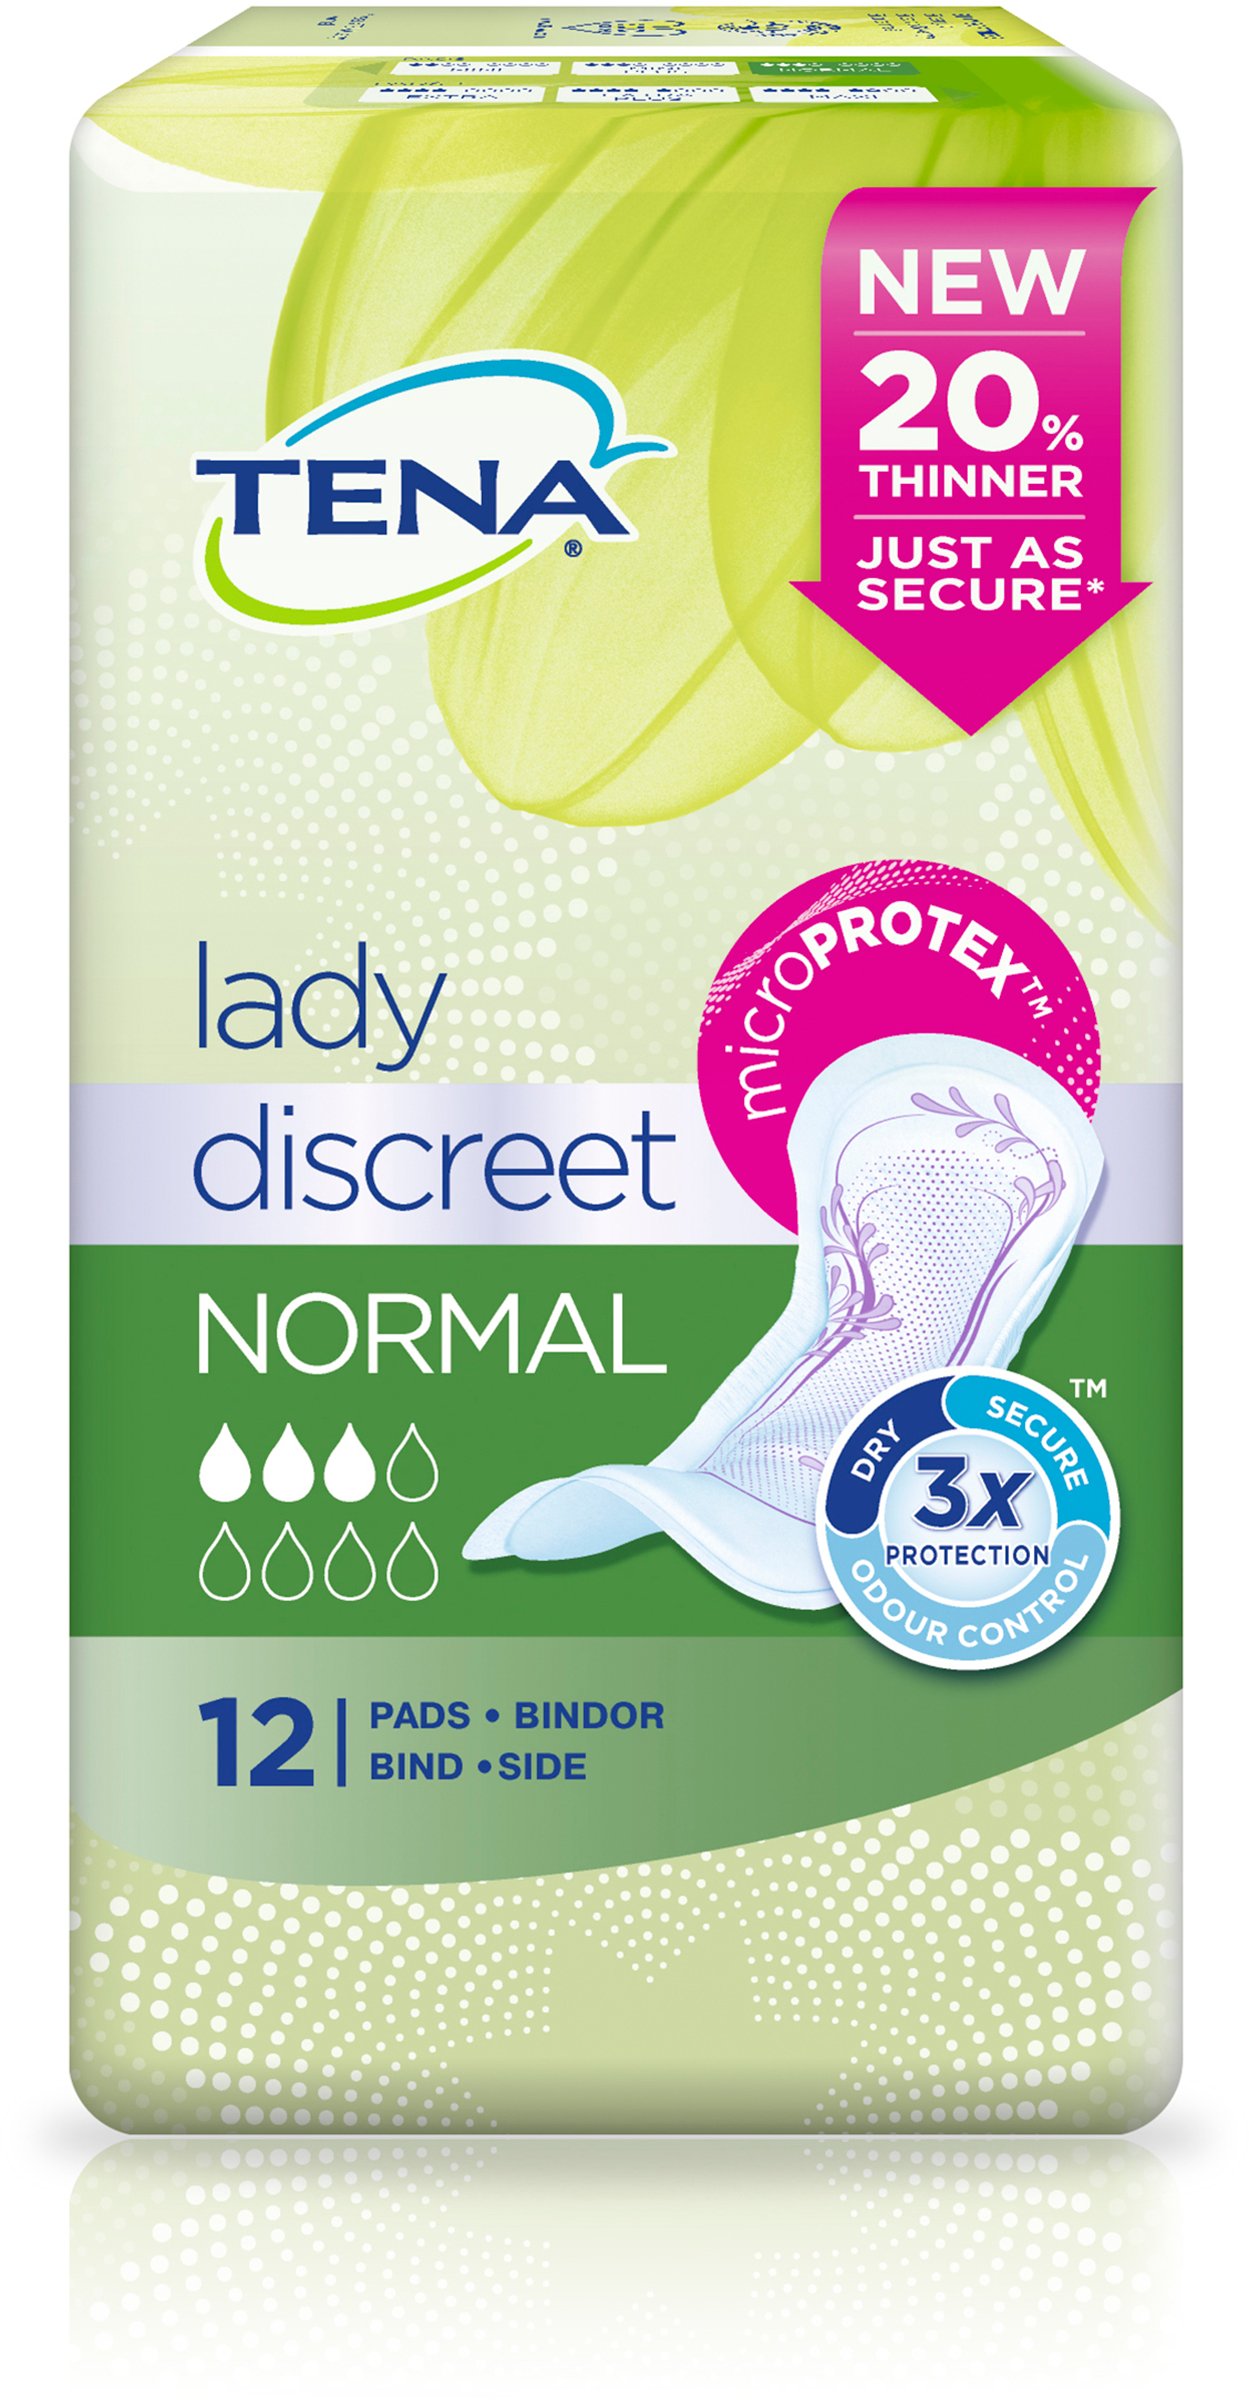 TENA Lady disc normal inkontinensskydd 12 st